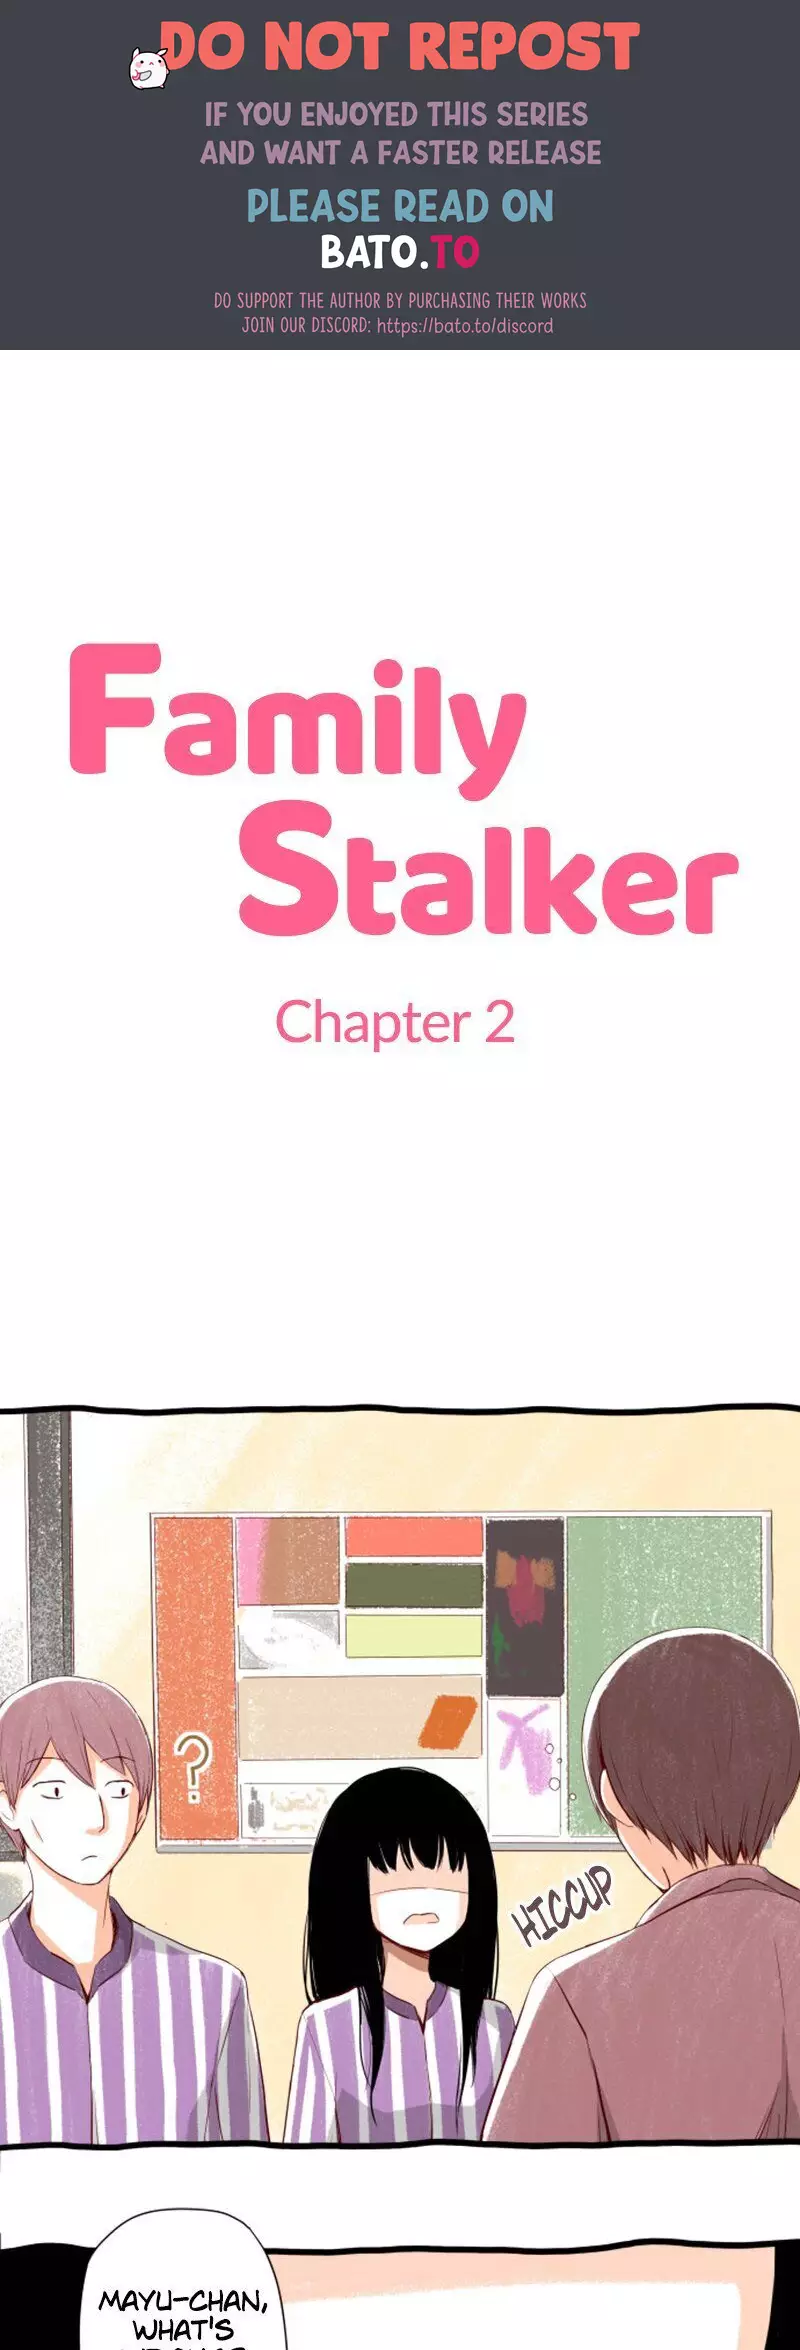 Family Stalker - 2 page 1-62584ed8